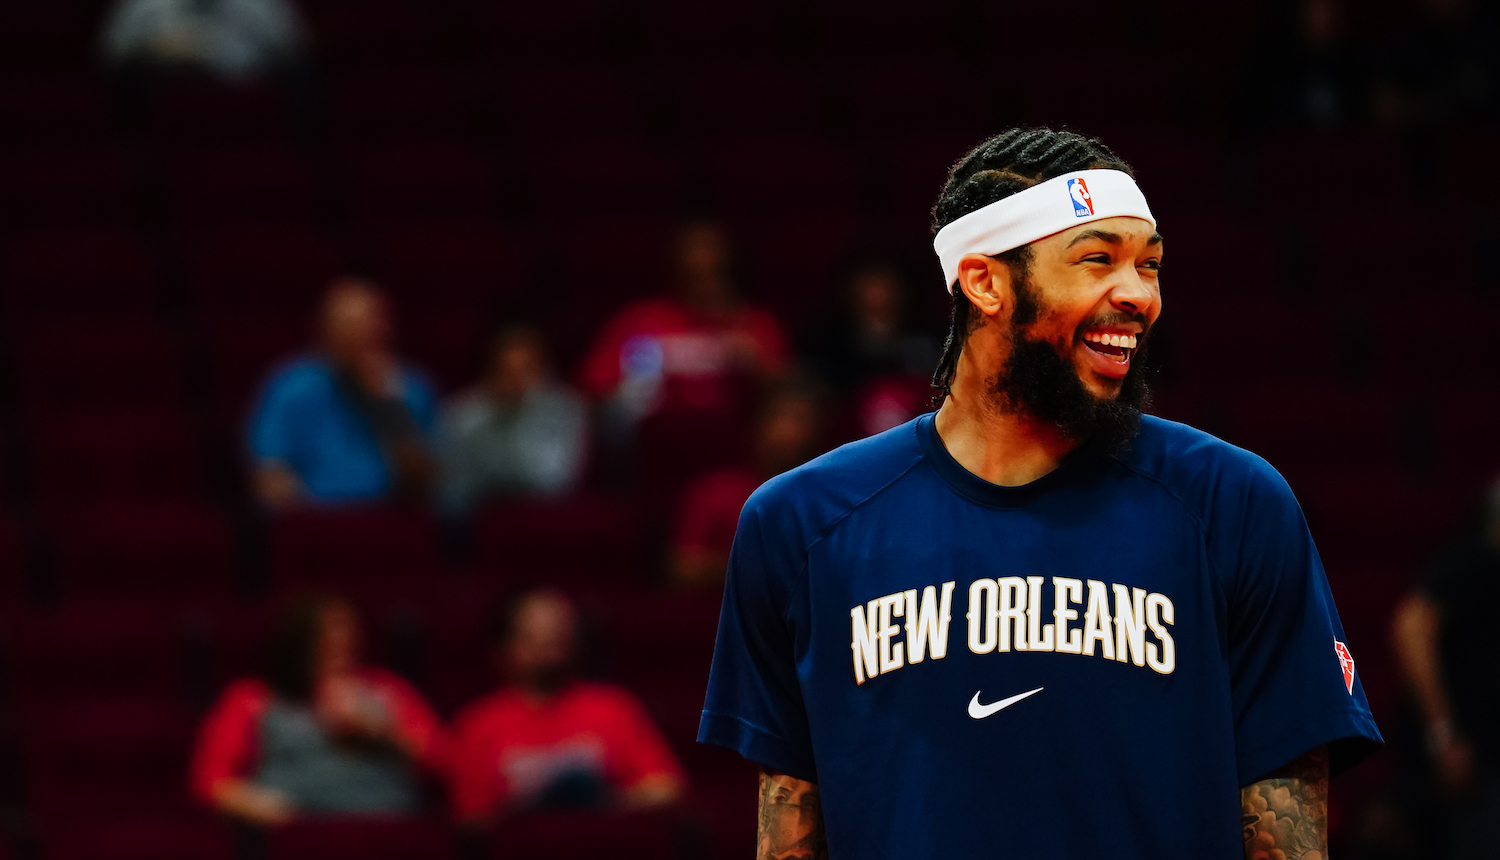 HOUSTON, TX - DECEMBER 05: Brandon Ingram #14 of the New Orleans Pelicans looks on before the game against the Houston Rockets at Toyota Center on December 5, 2021 in Houston, Texas. NOTE TO USER: User expressly acknowledges and agrees that, by downloading and/or using this Photograph, user is consenting to the terms and conditions of the Getty Images License Agreement. (Photo by Alex Bierens de Haan/Getty Images)